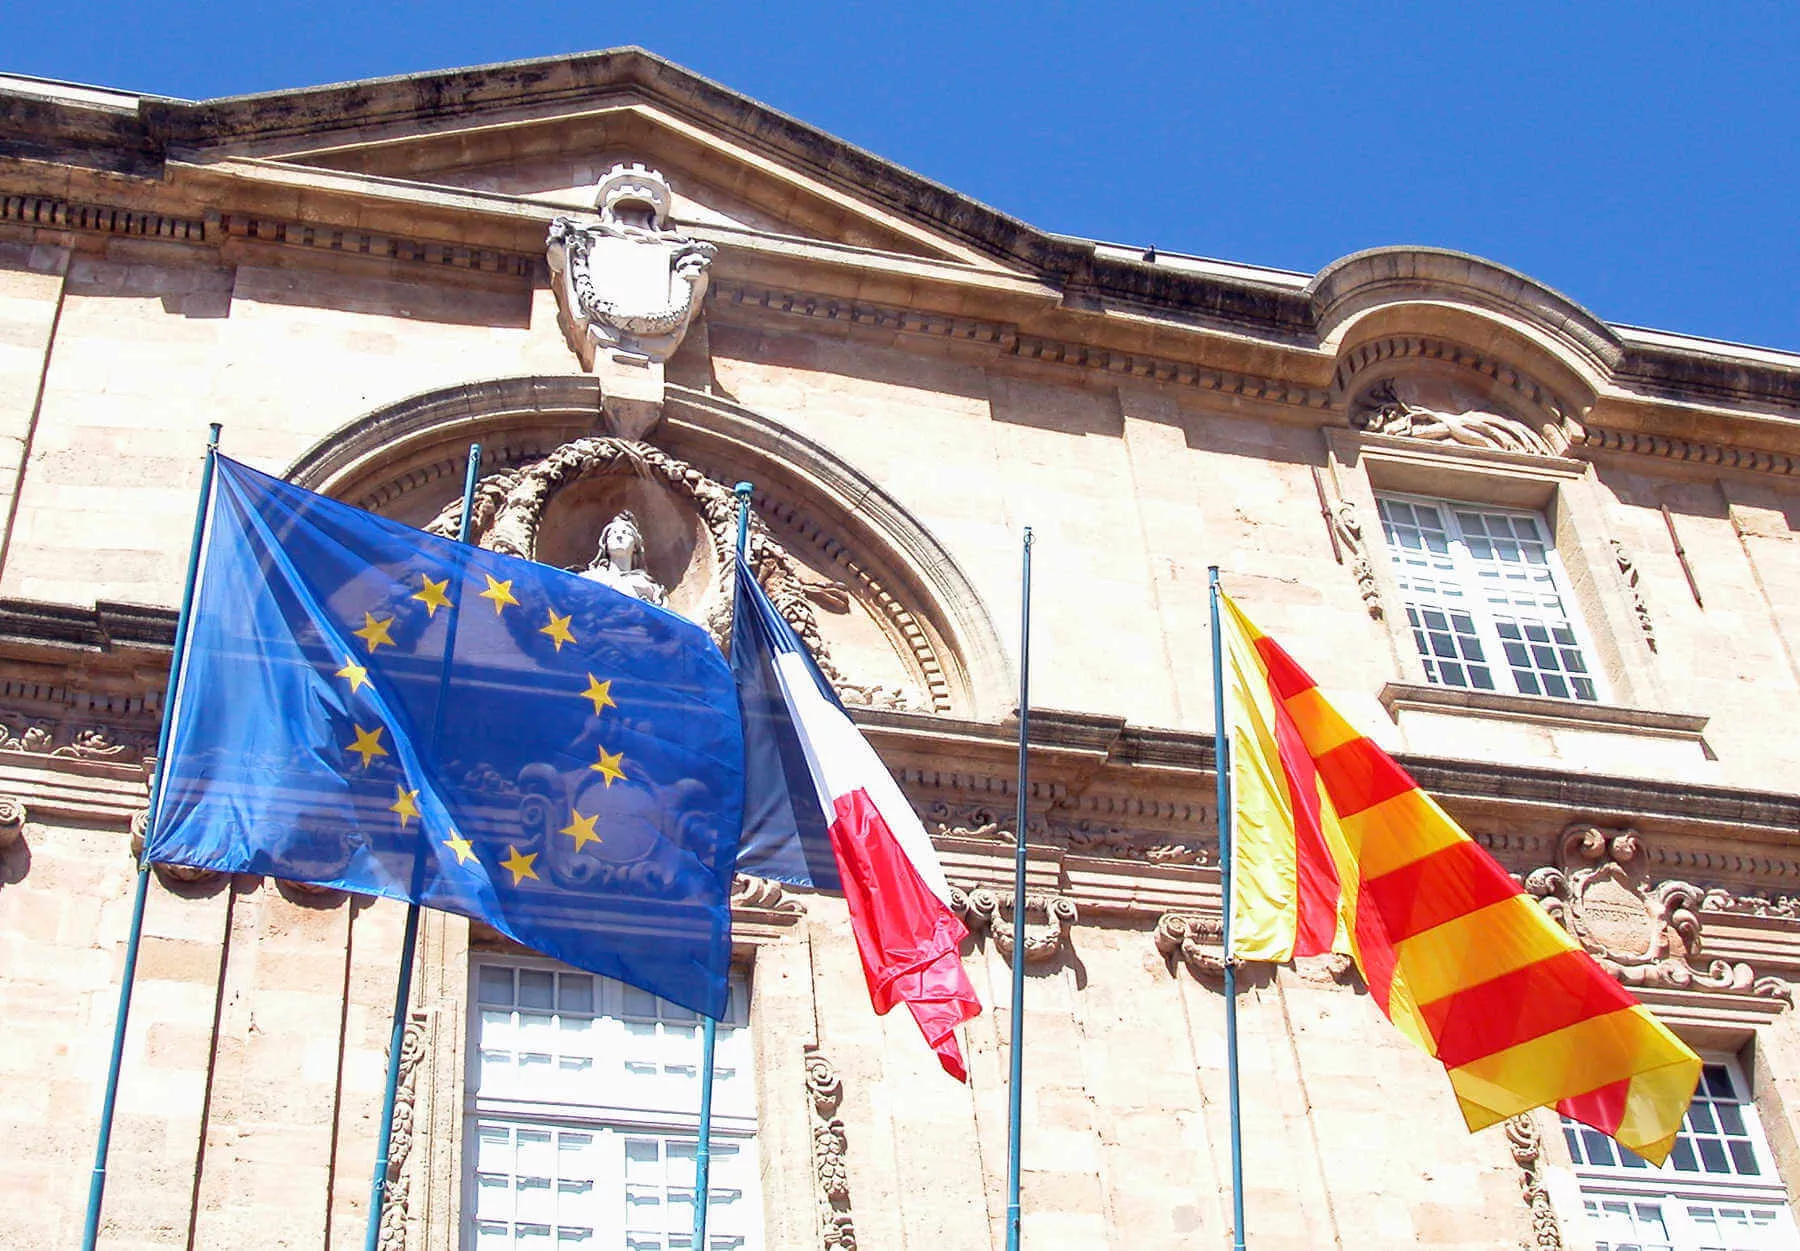 On European town halls, locals often fly three flags. Here in Aix-en-Provence, you’ll see (left to right) the European, national (France), and regional (Provence) flags